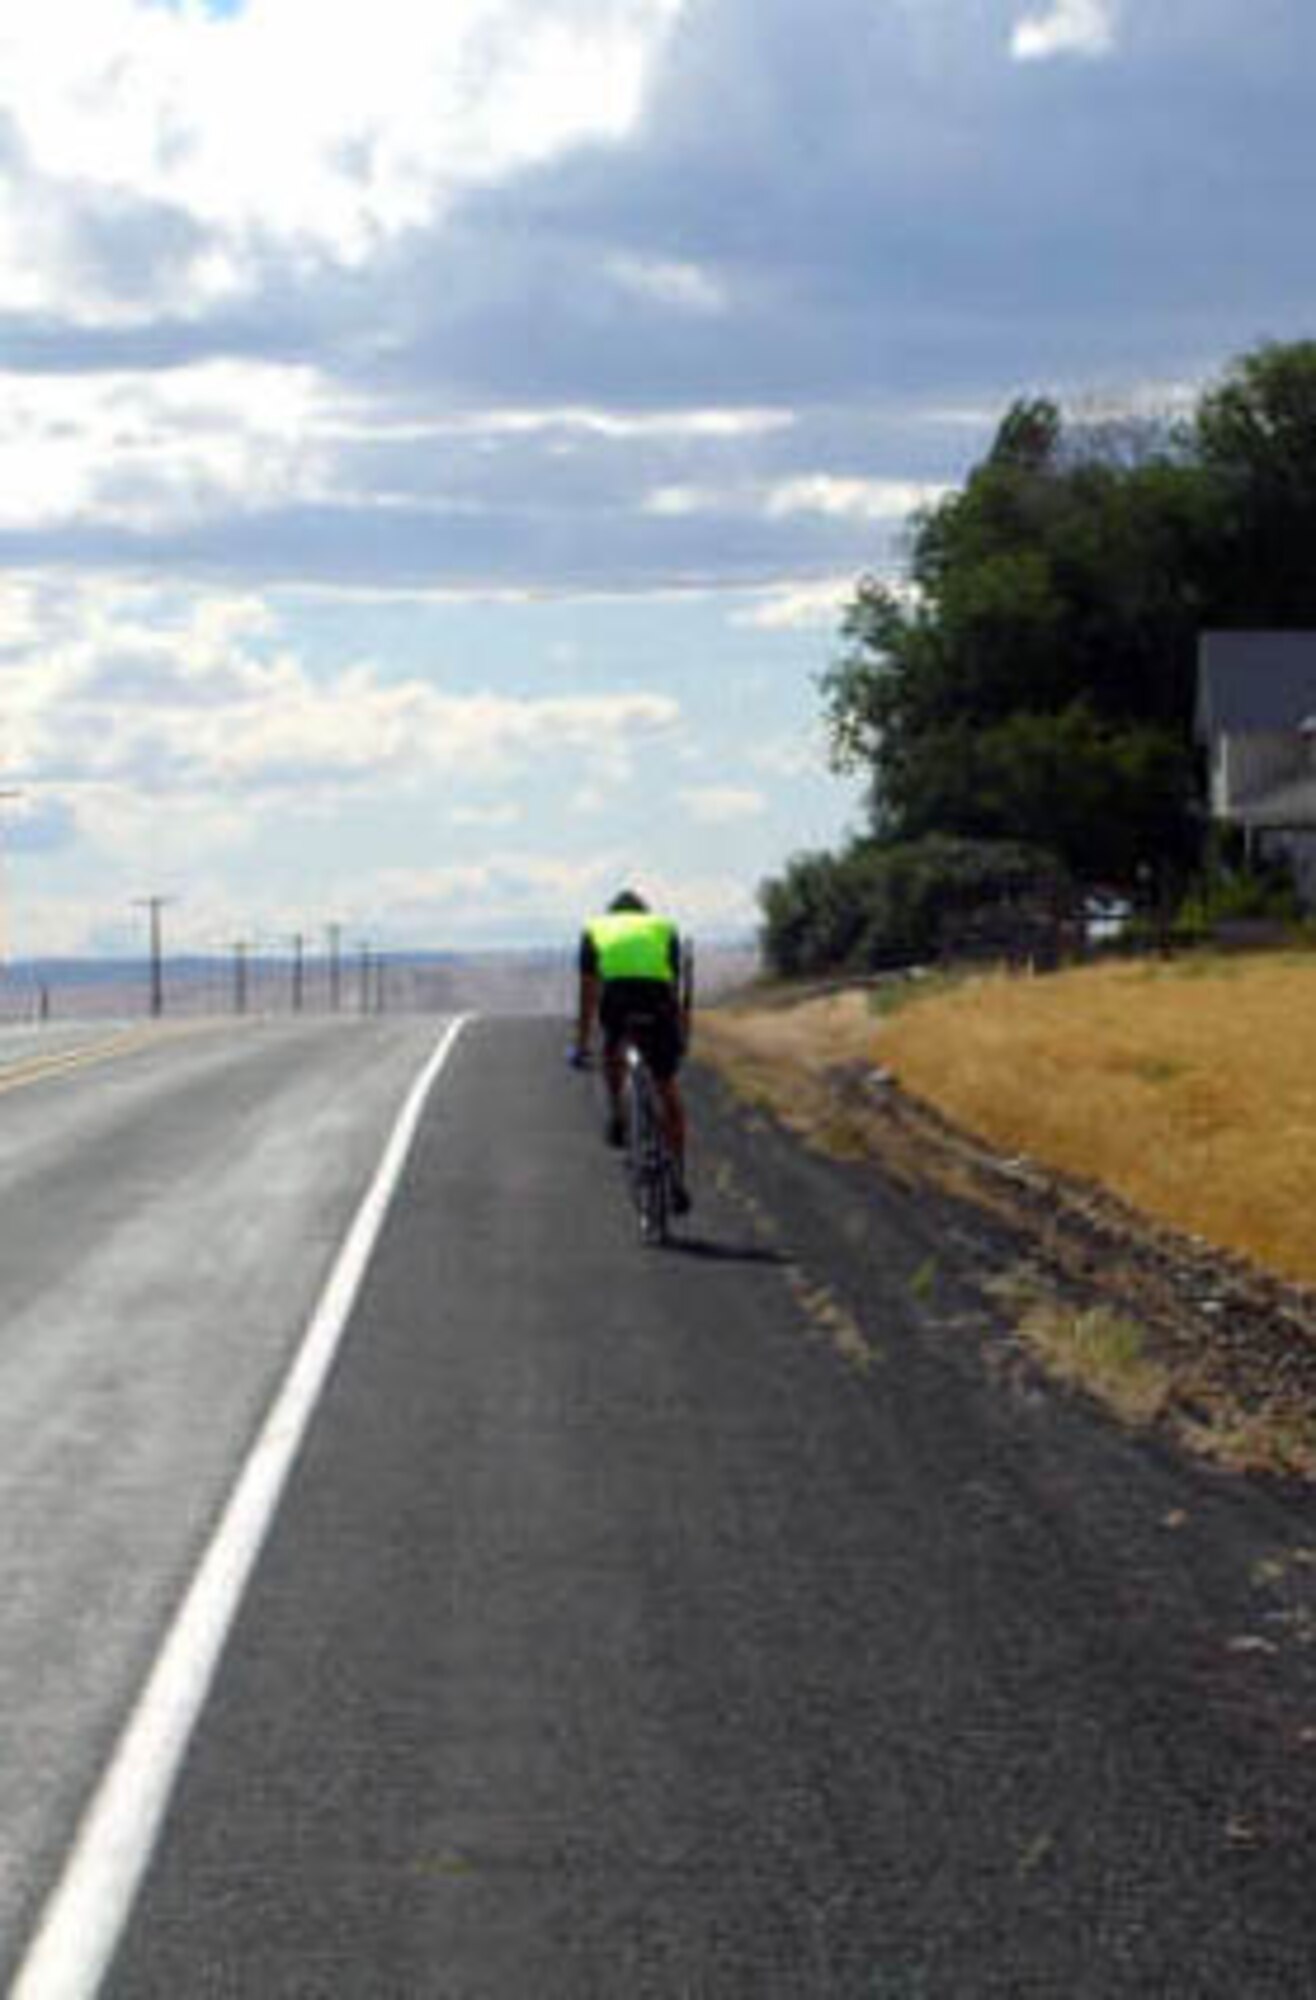 LAUGHLIN AIR FORCE BASE, Texas -- Capt. Luke Marker, pedaled from Del Rio to Lake Chalen, Wash., nearly 2000 miles on his 20-day trek across America. (courtesy photo)